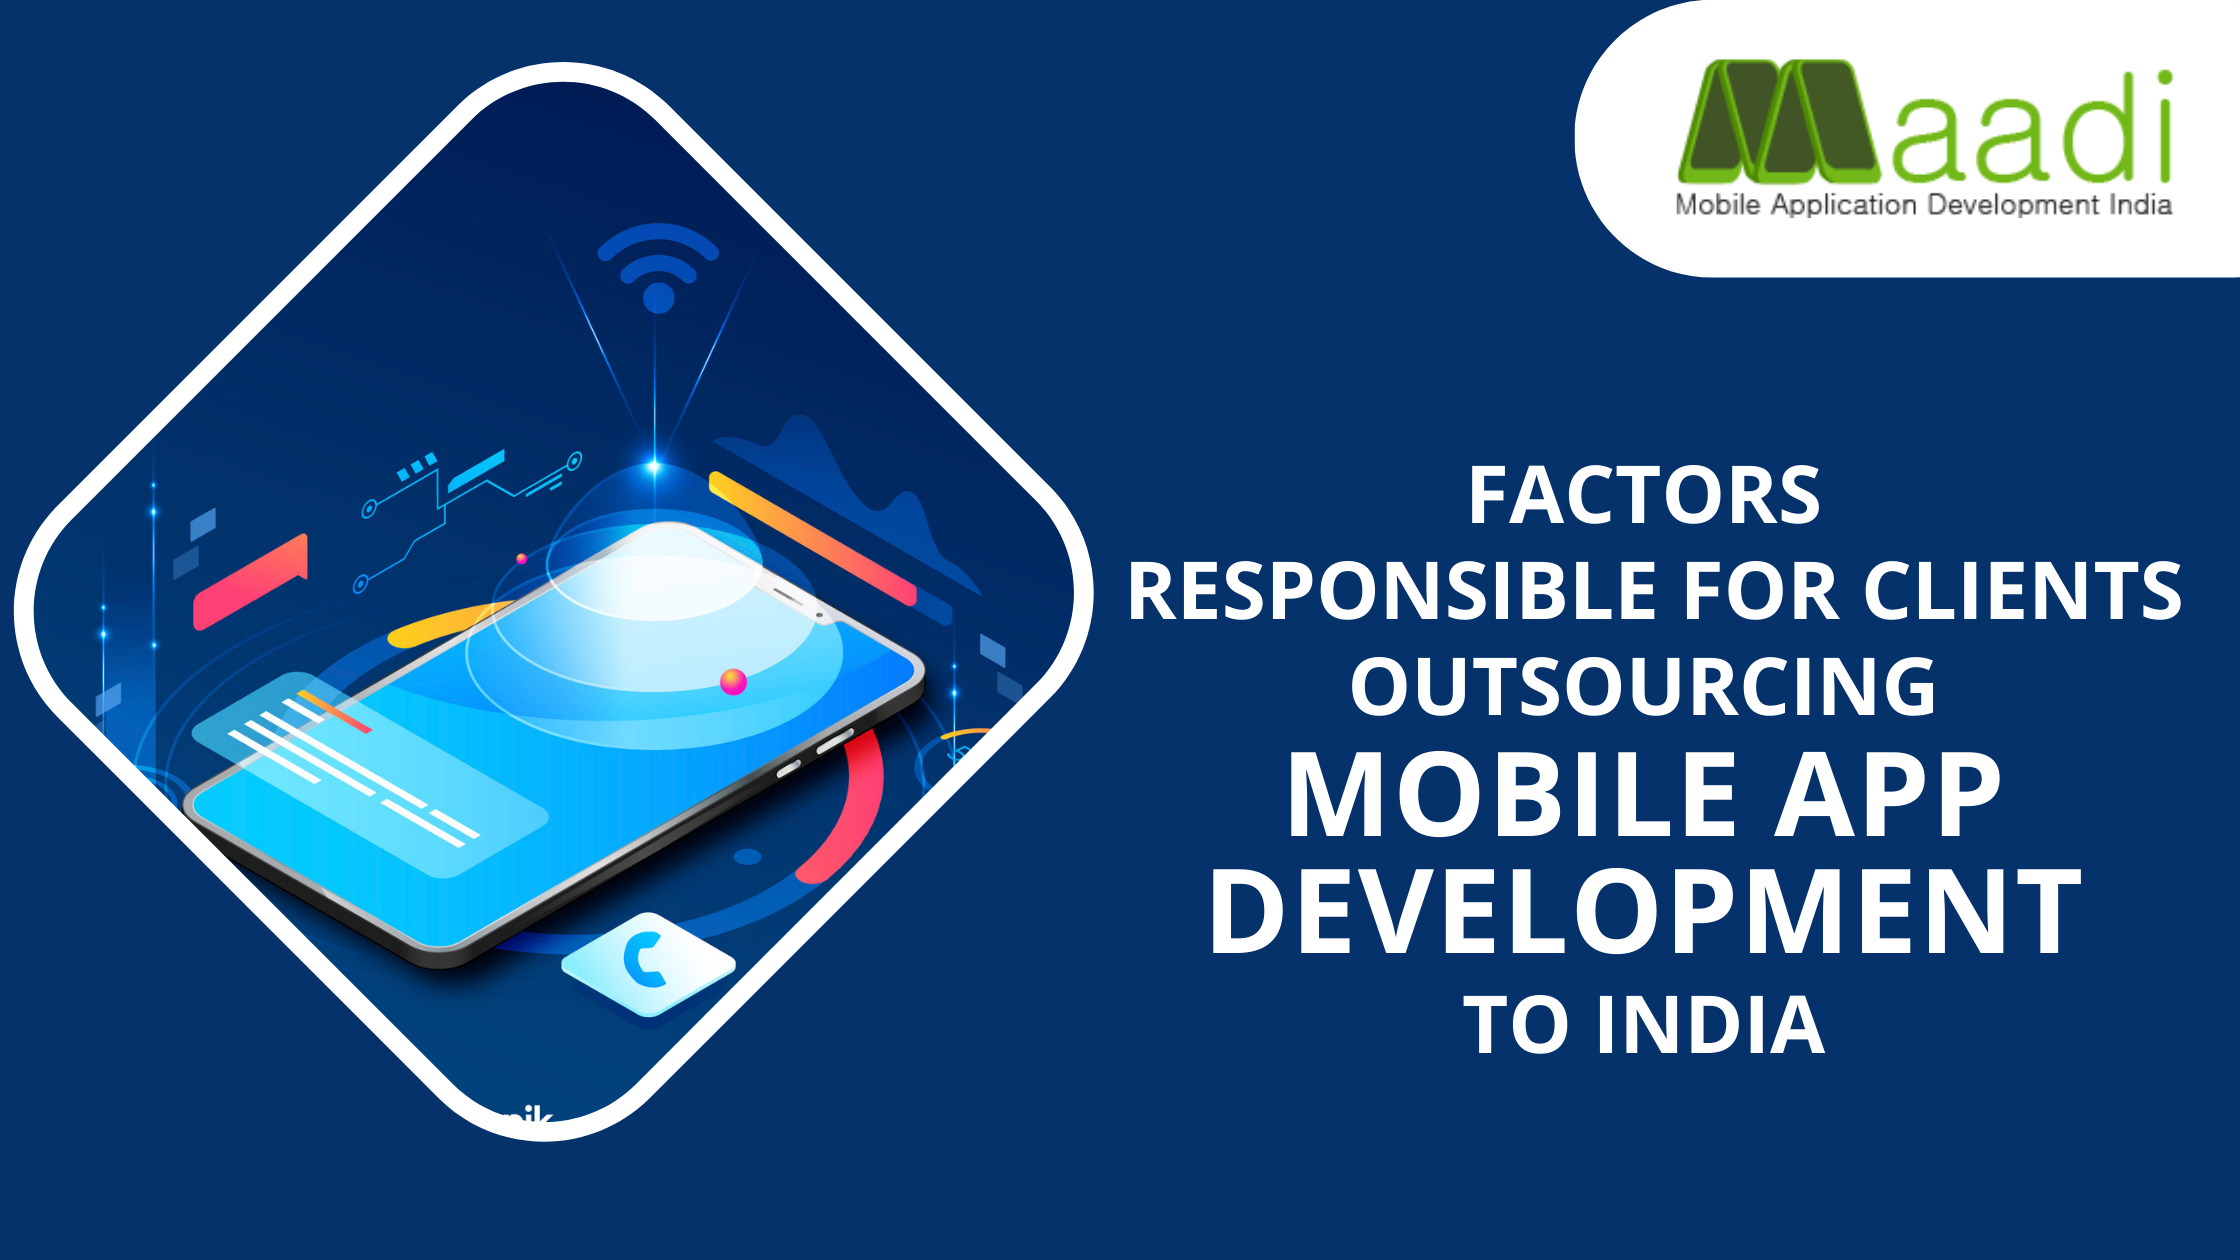 Factors Responsible for Clients Outsourcing Mobile App Development from India